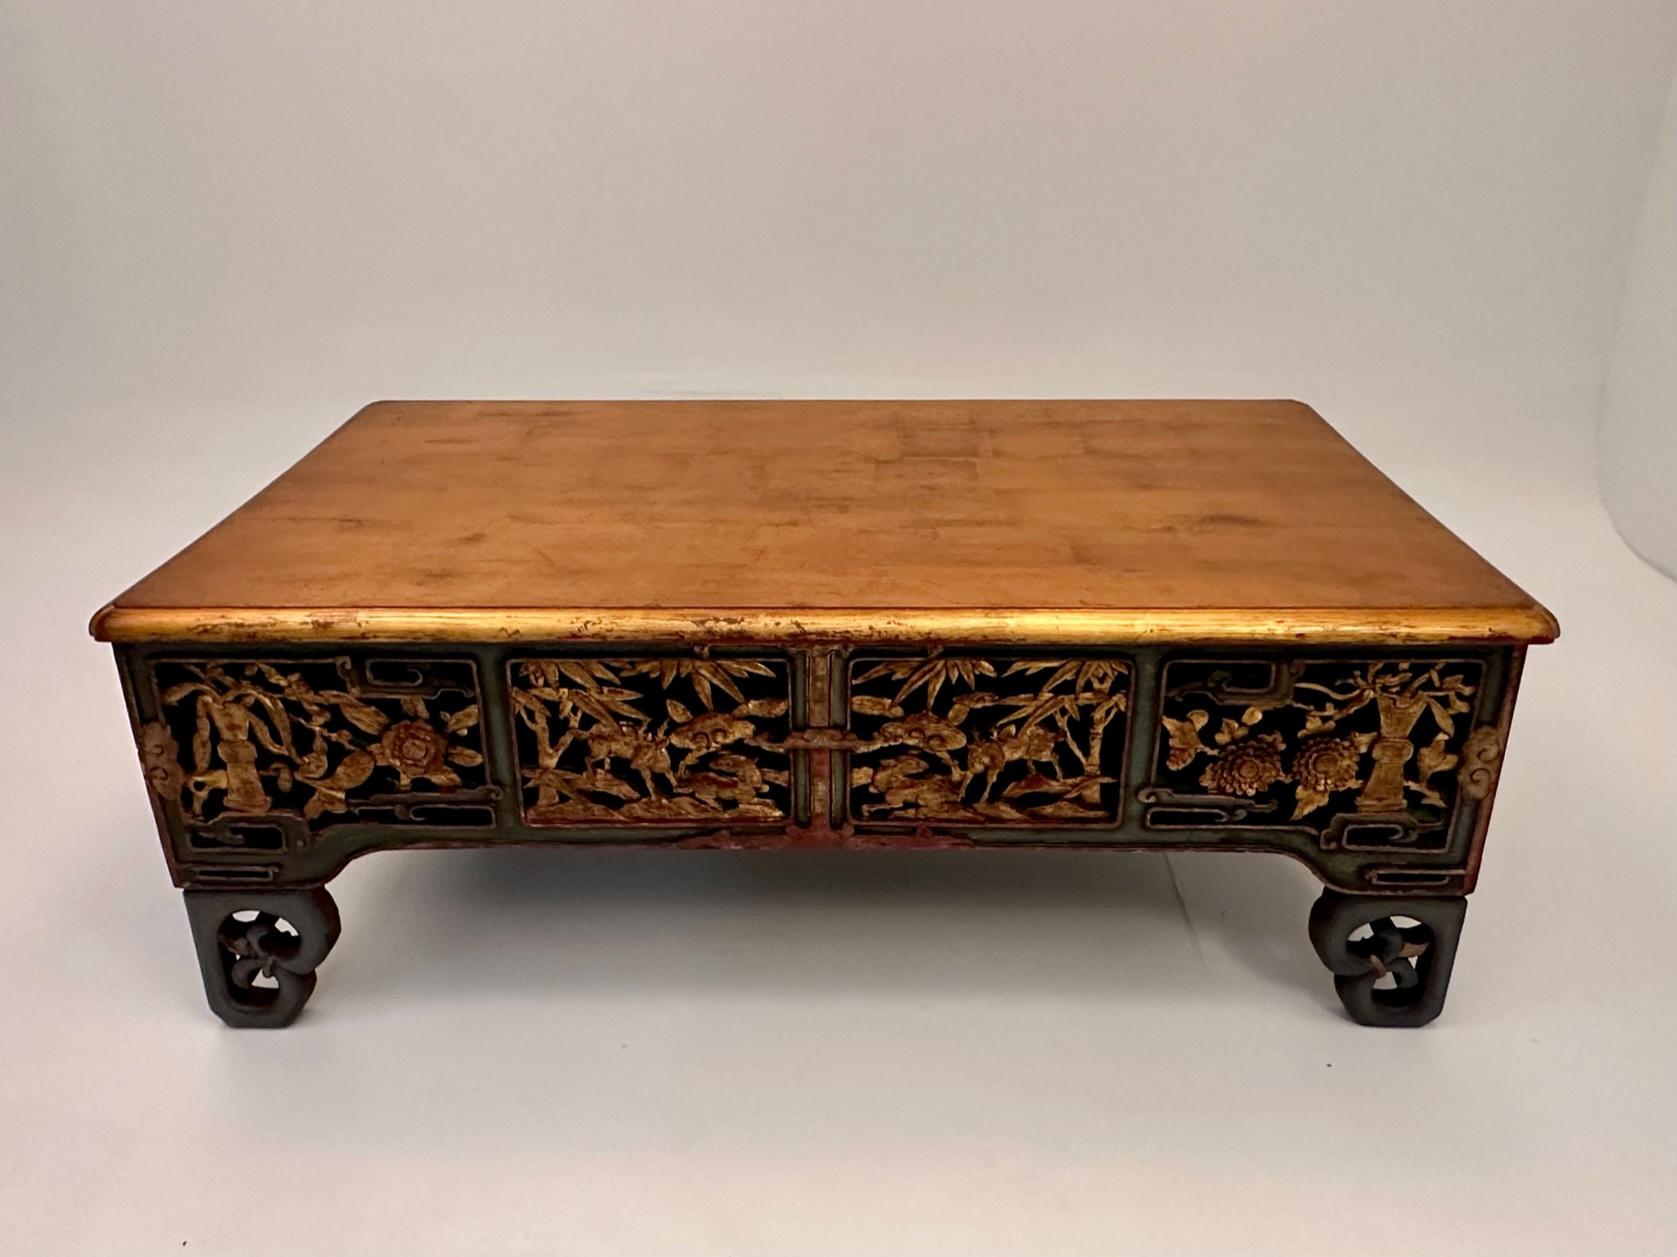 Glamorous beautifully crafted hand carved rectangular coffee table having meticulously detailed apron with birds and foliage and polychromed gilded red and green finish.  The top is a warm burnished gold.